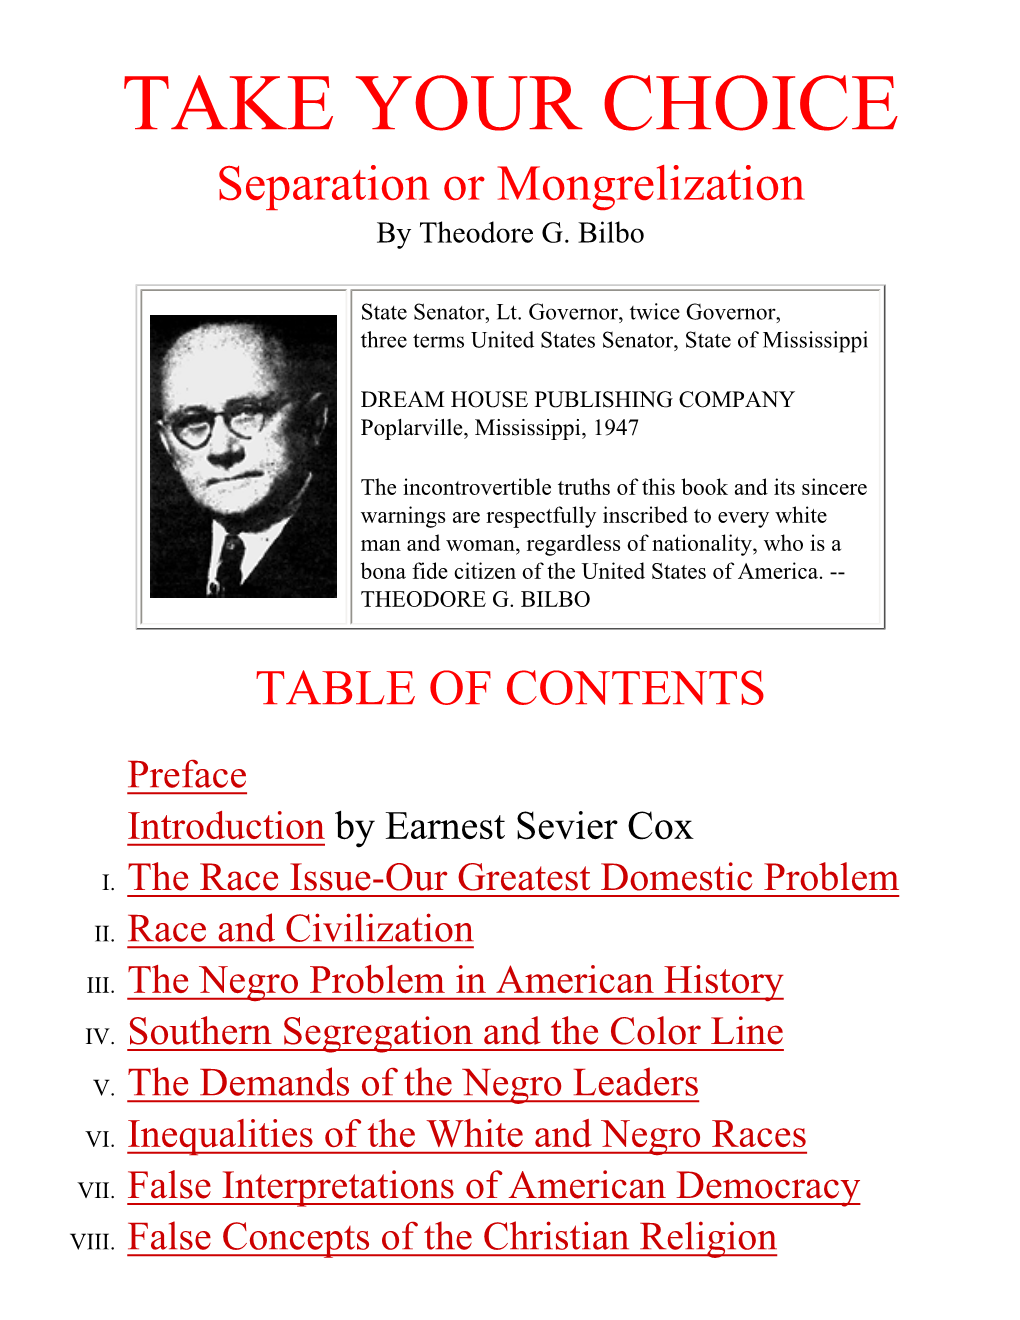 TAKE YOUR CHOICE Separation Or Mongrelization by Theodore G